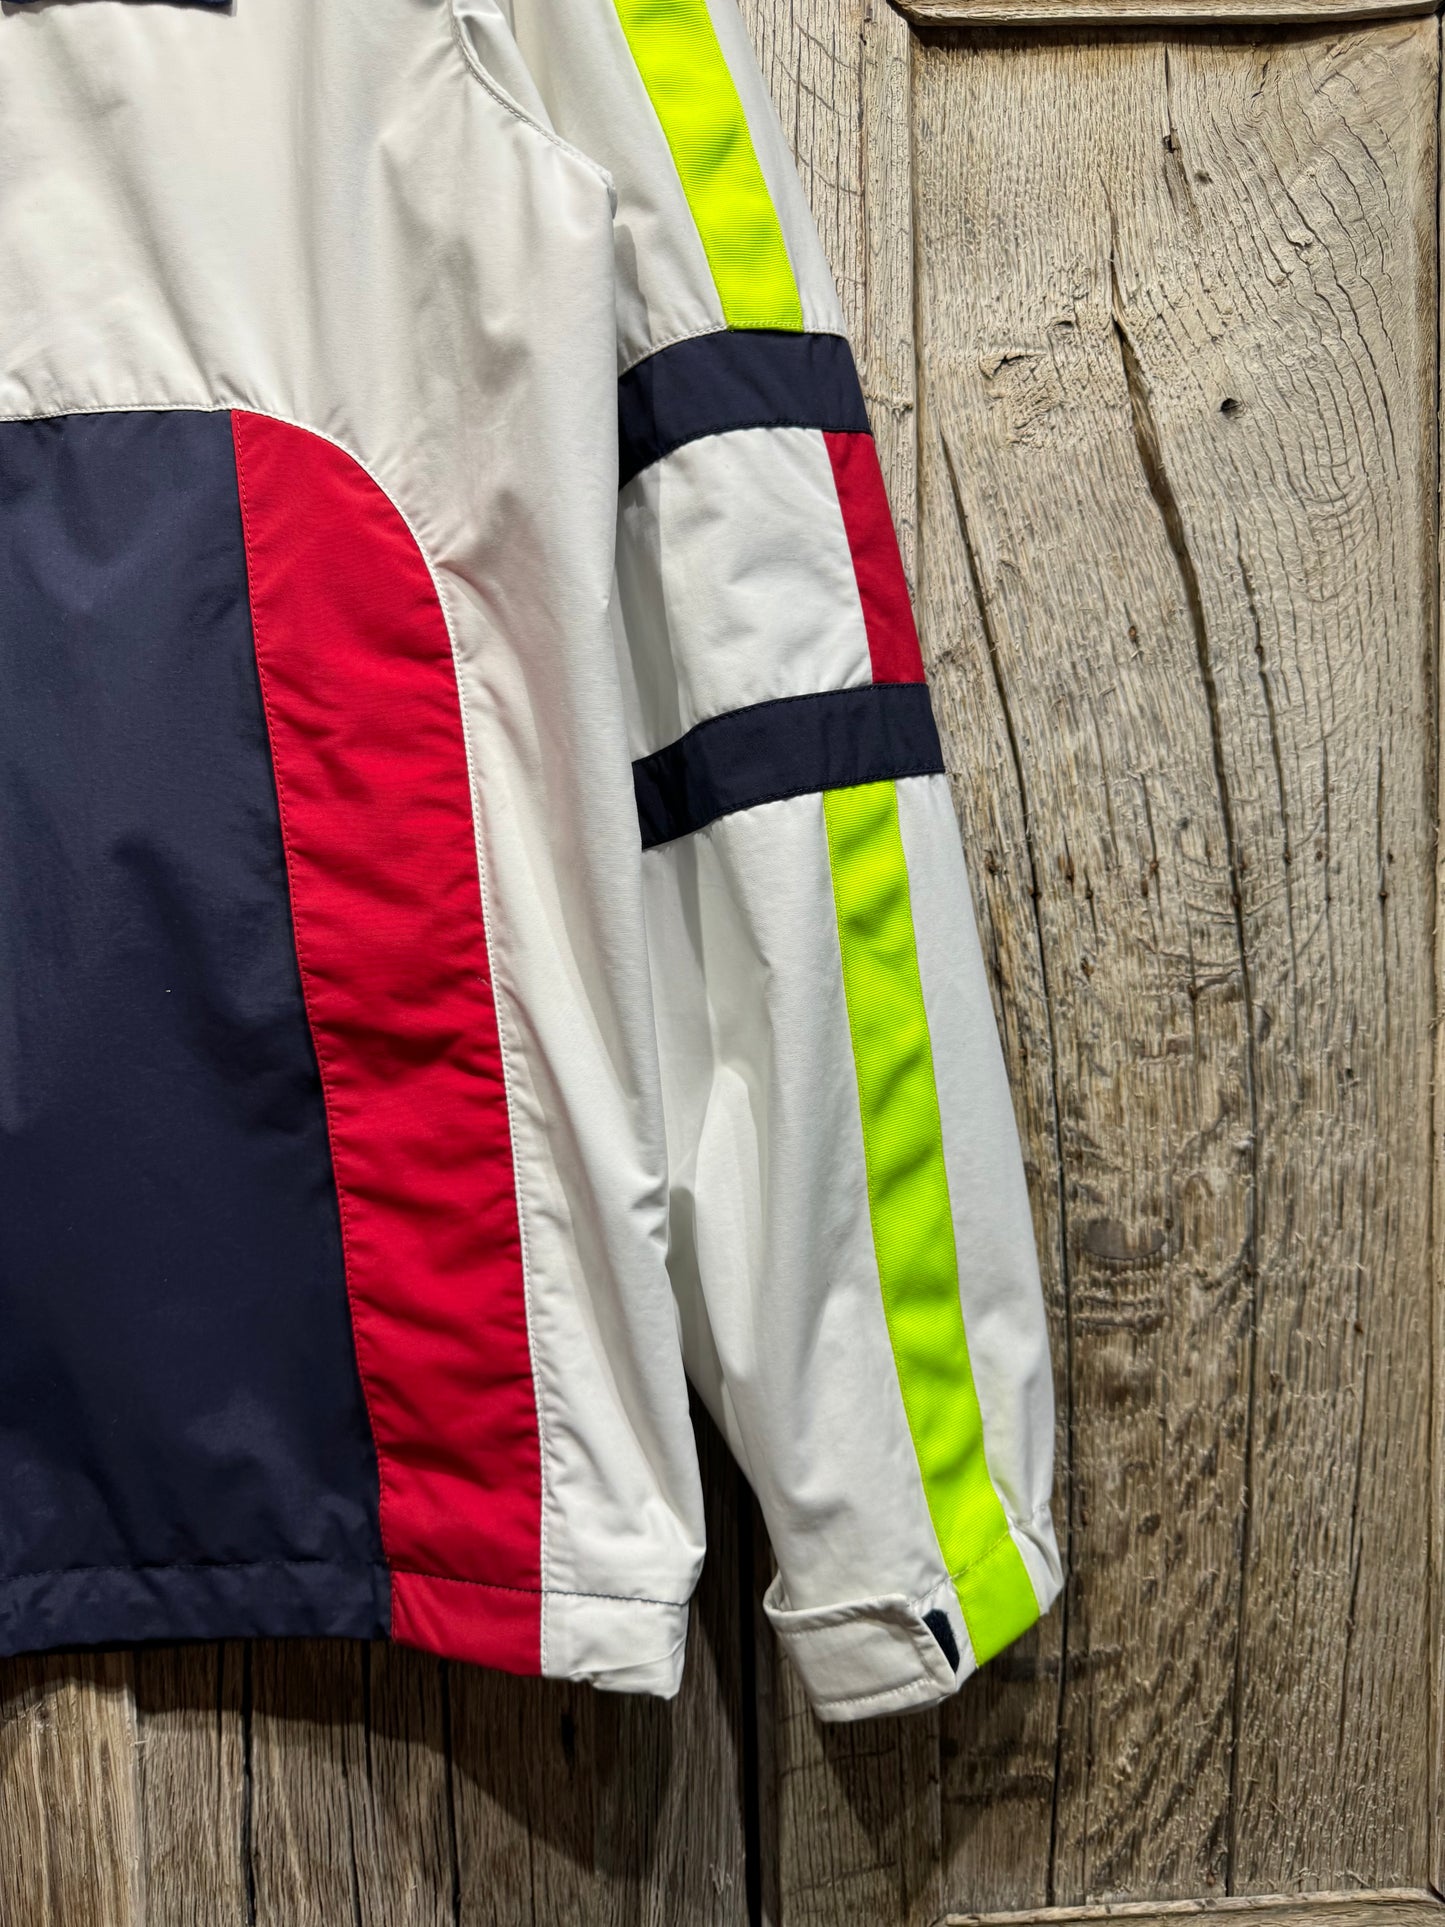 Tommy Jeans Sailing Gear Jacket